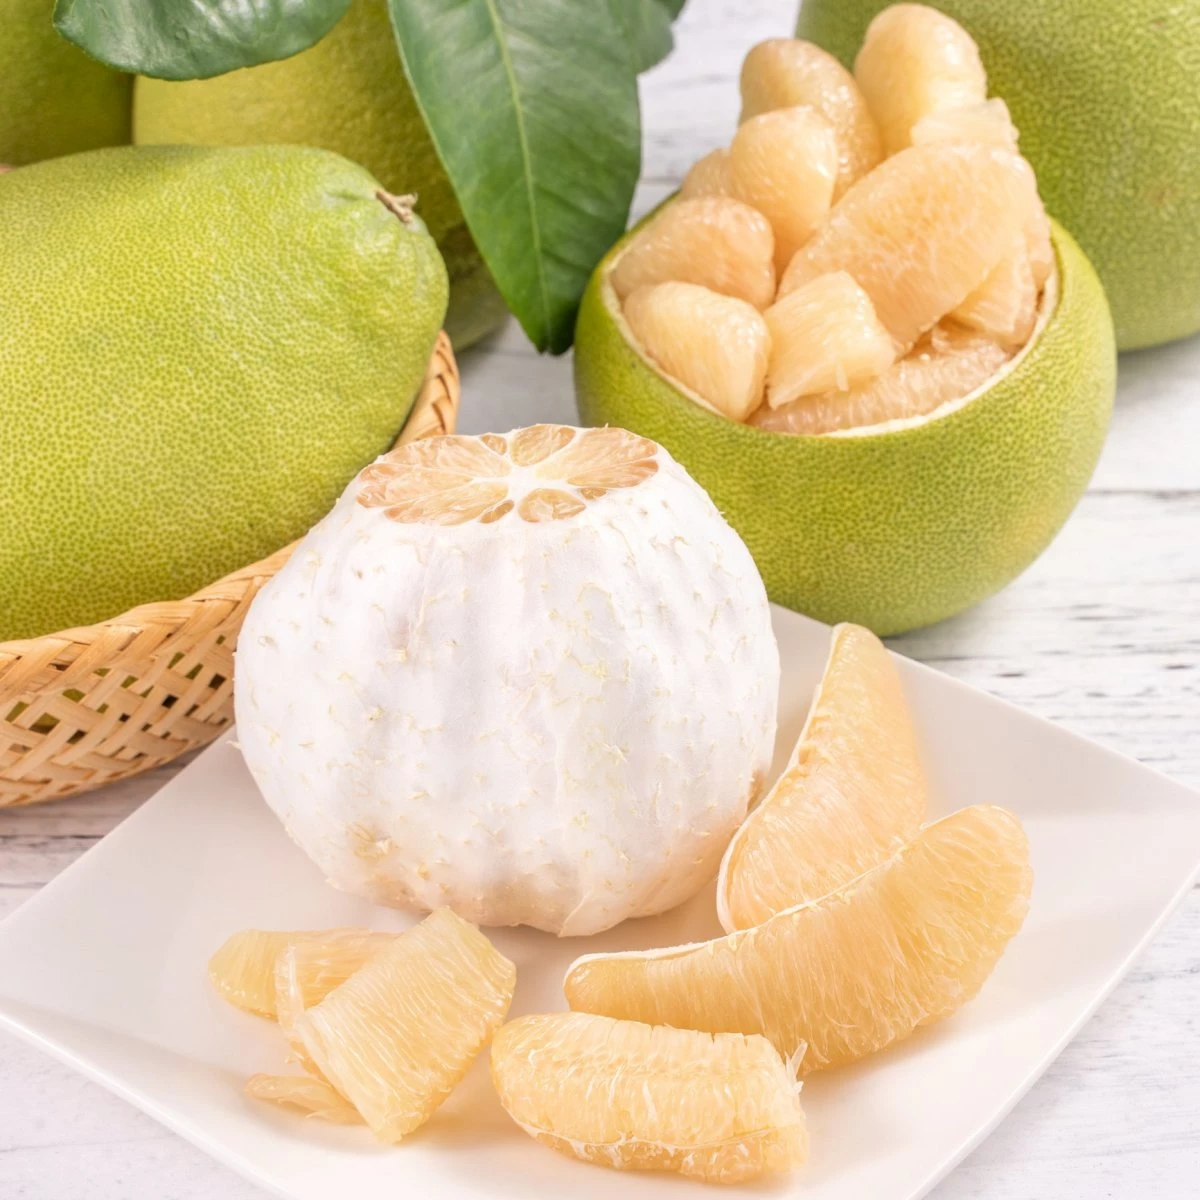 Pomelo is the seventh fresh fruit from Vietnam to receive permission to enter the US market.